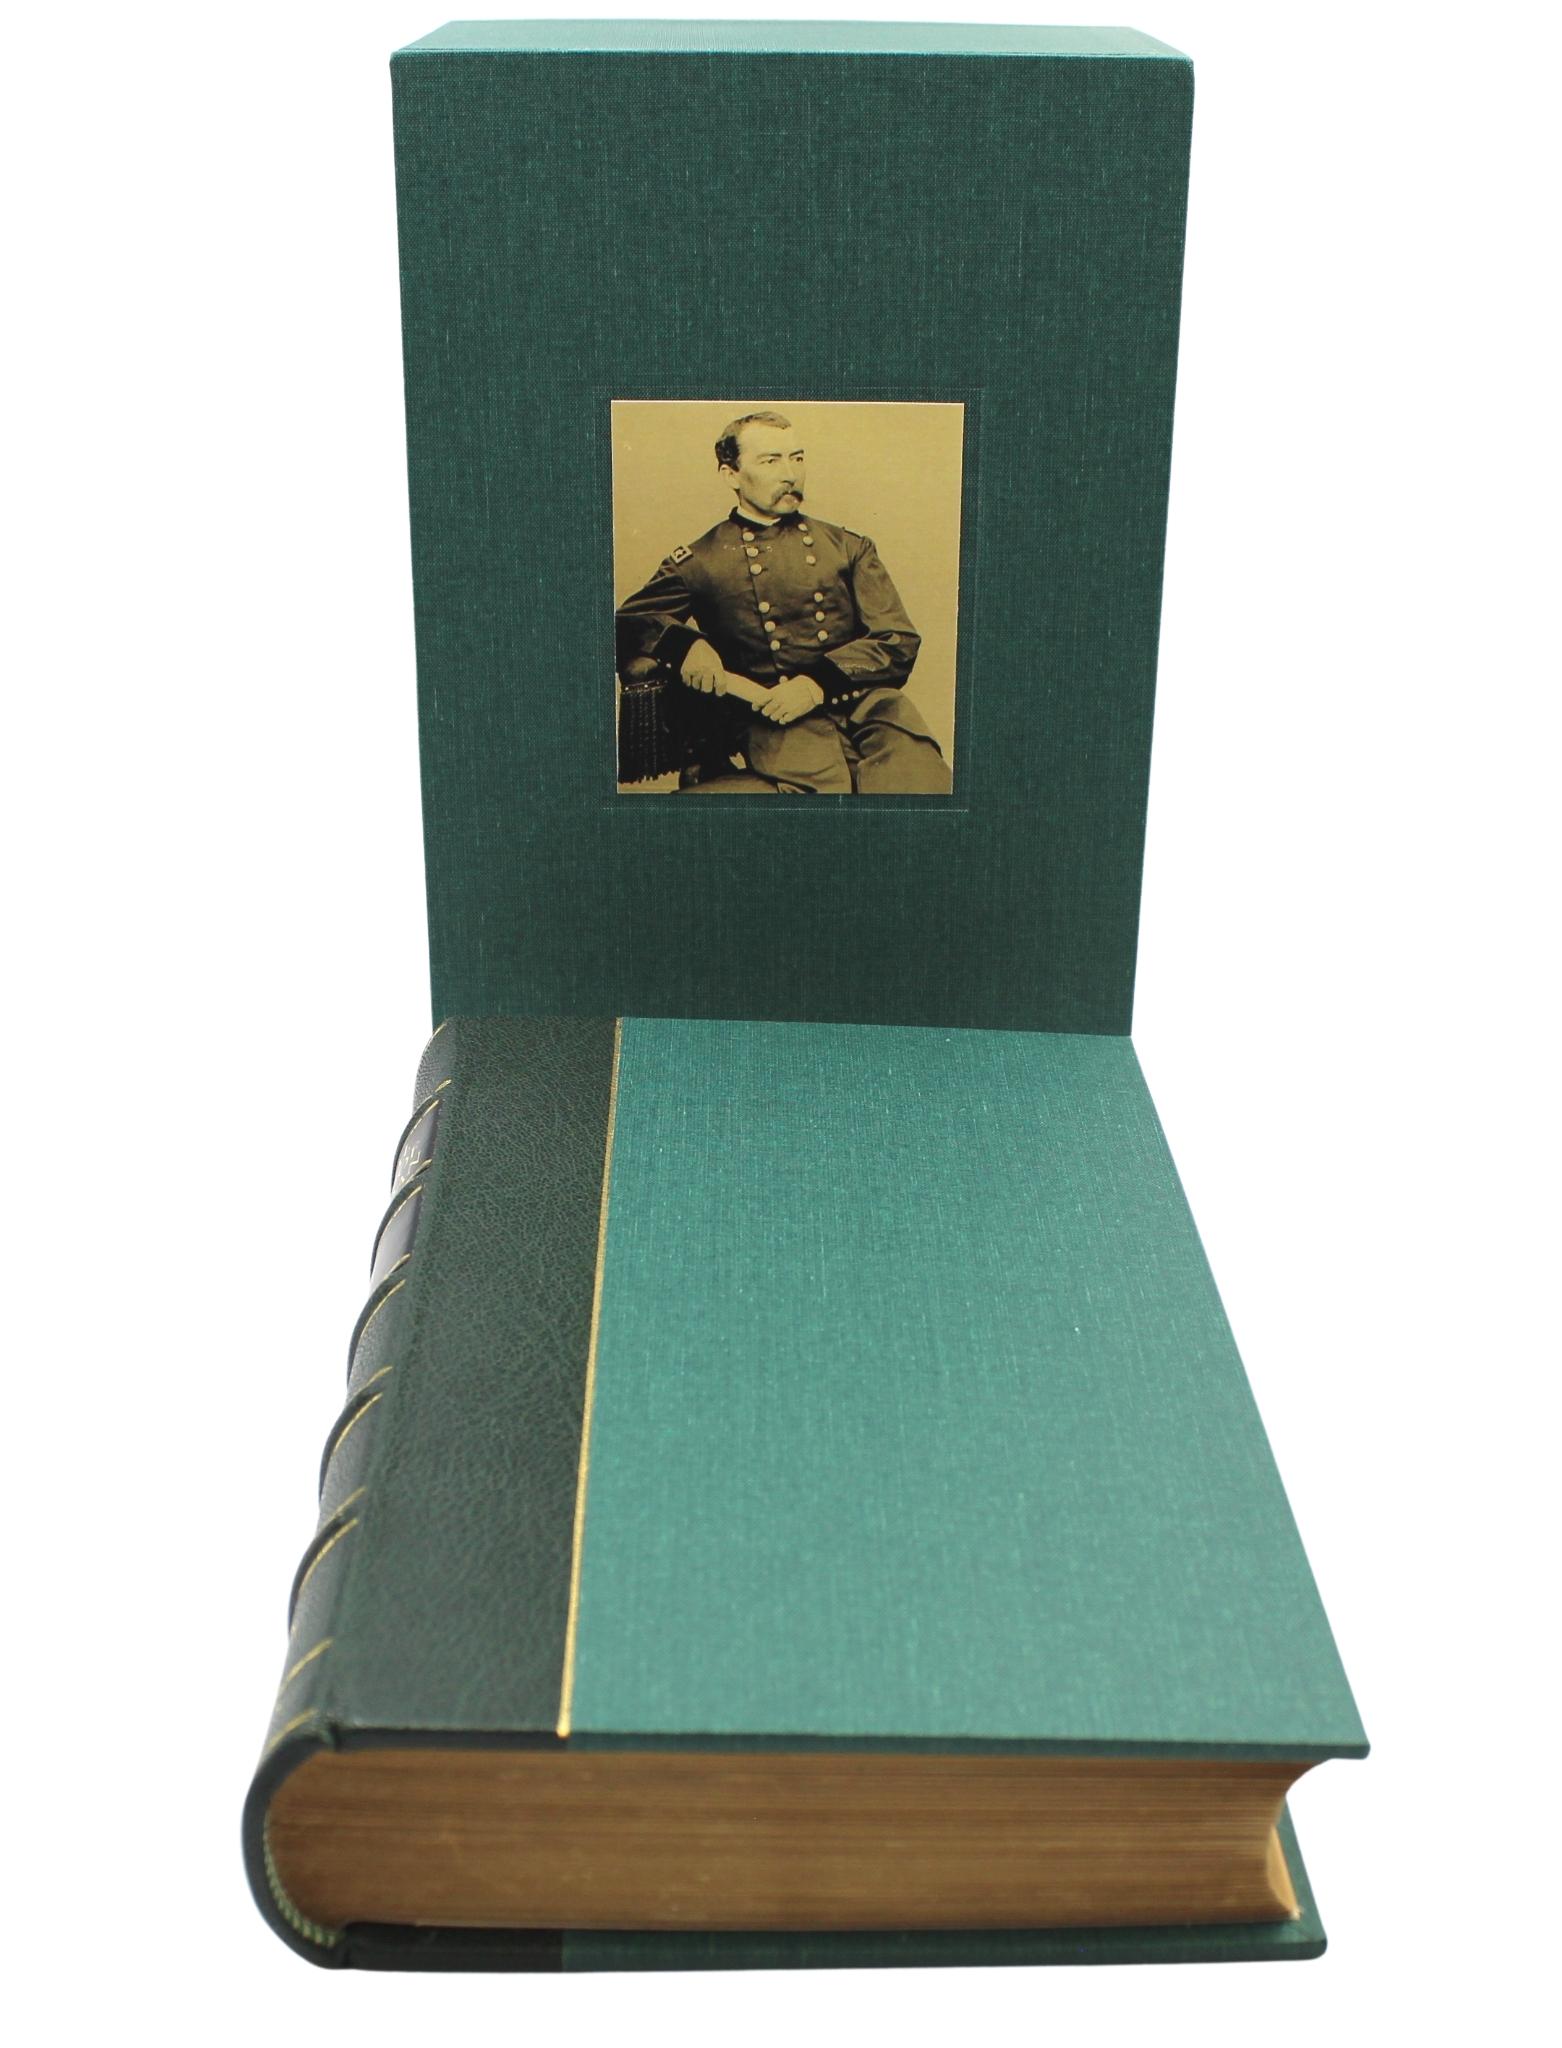 Sheridan, Philip Henry. Personal Memoirs of P.H. Sheridan, General United States Army. New York: Charles L. Webster & Company, 1888. First Edition. Two Volumes. Rebound in green quarter leather and cloth boards, with raised bands, girl tooling and